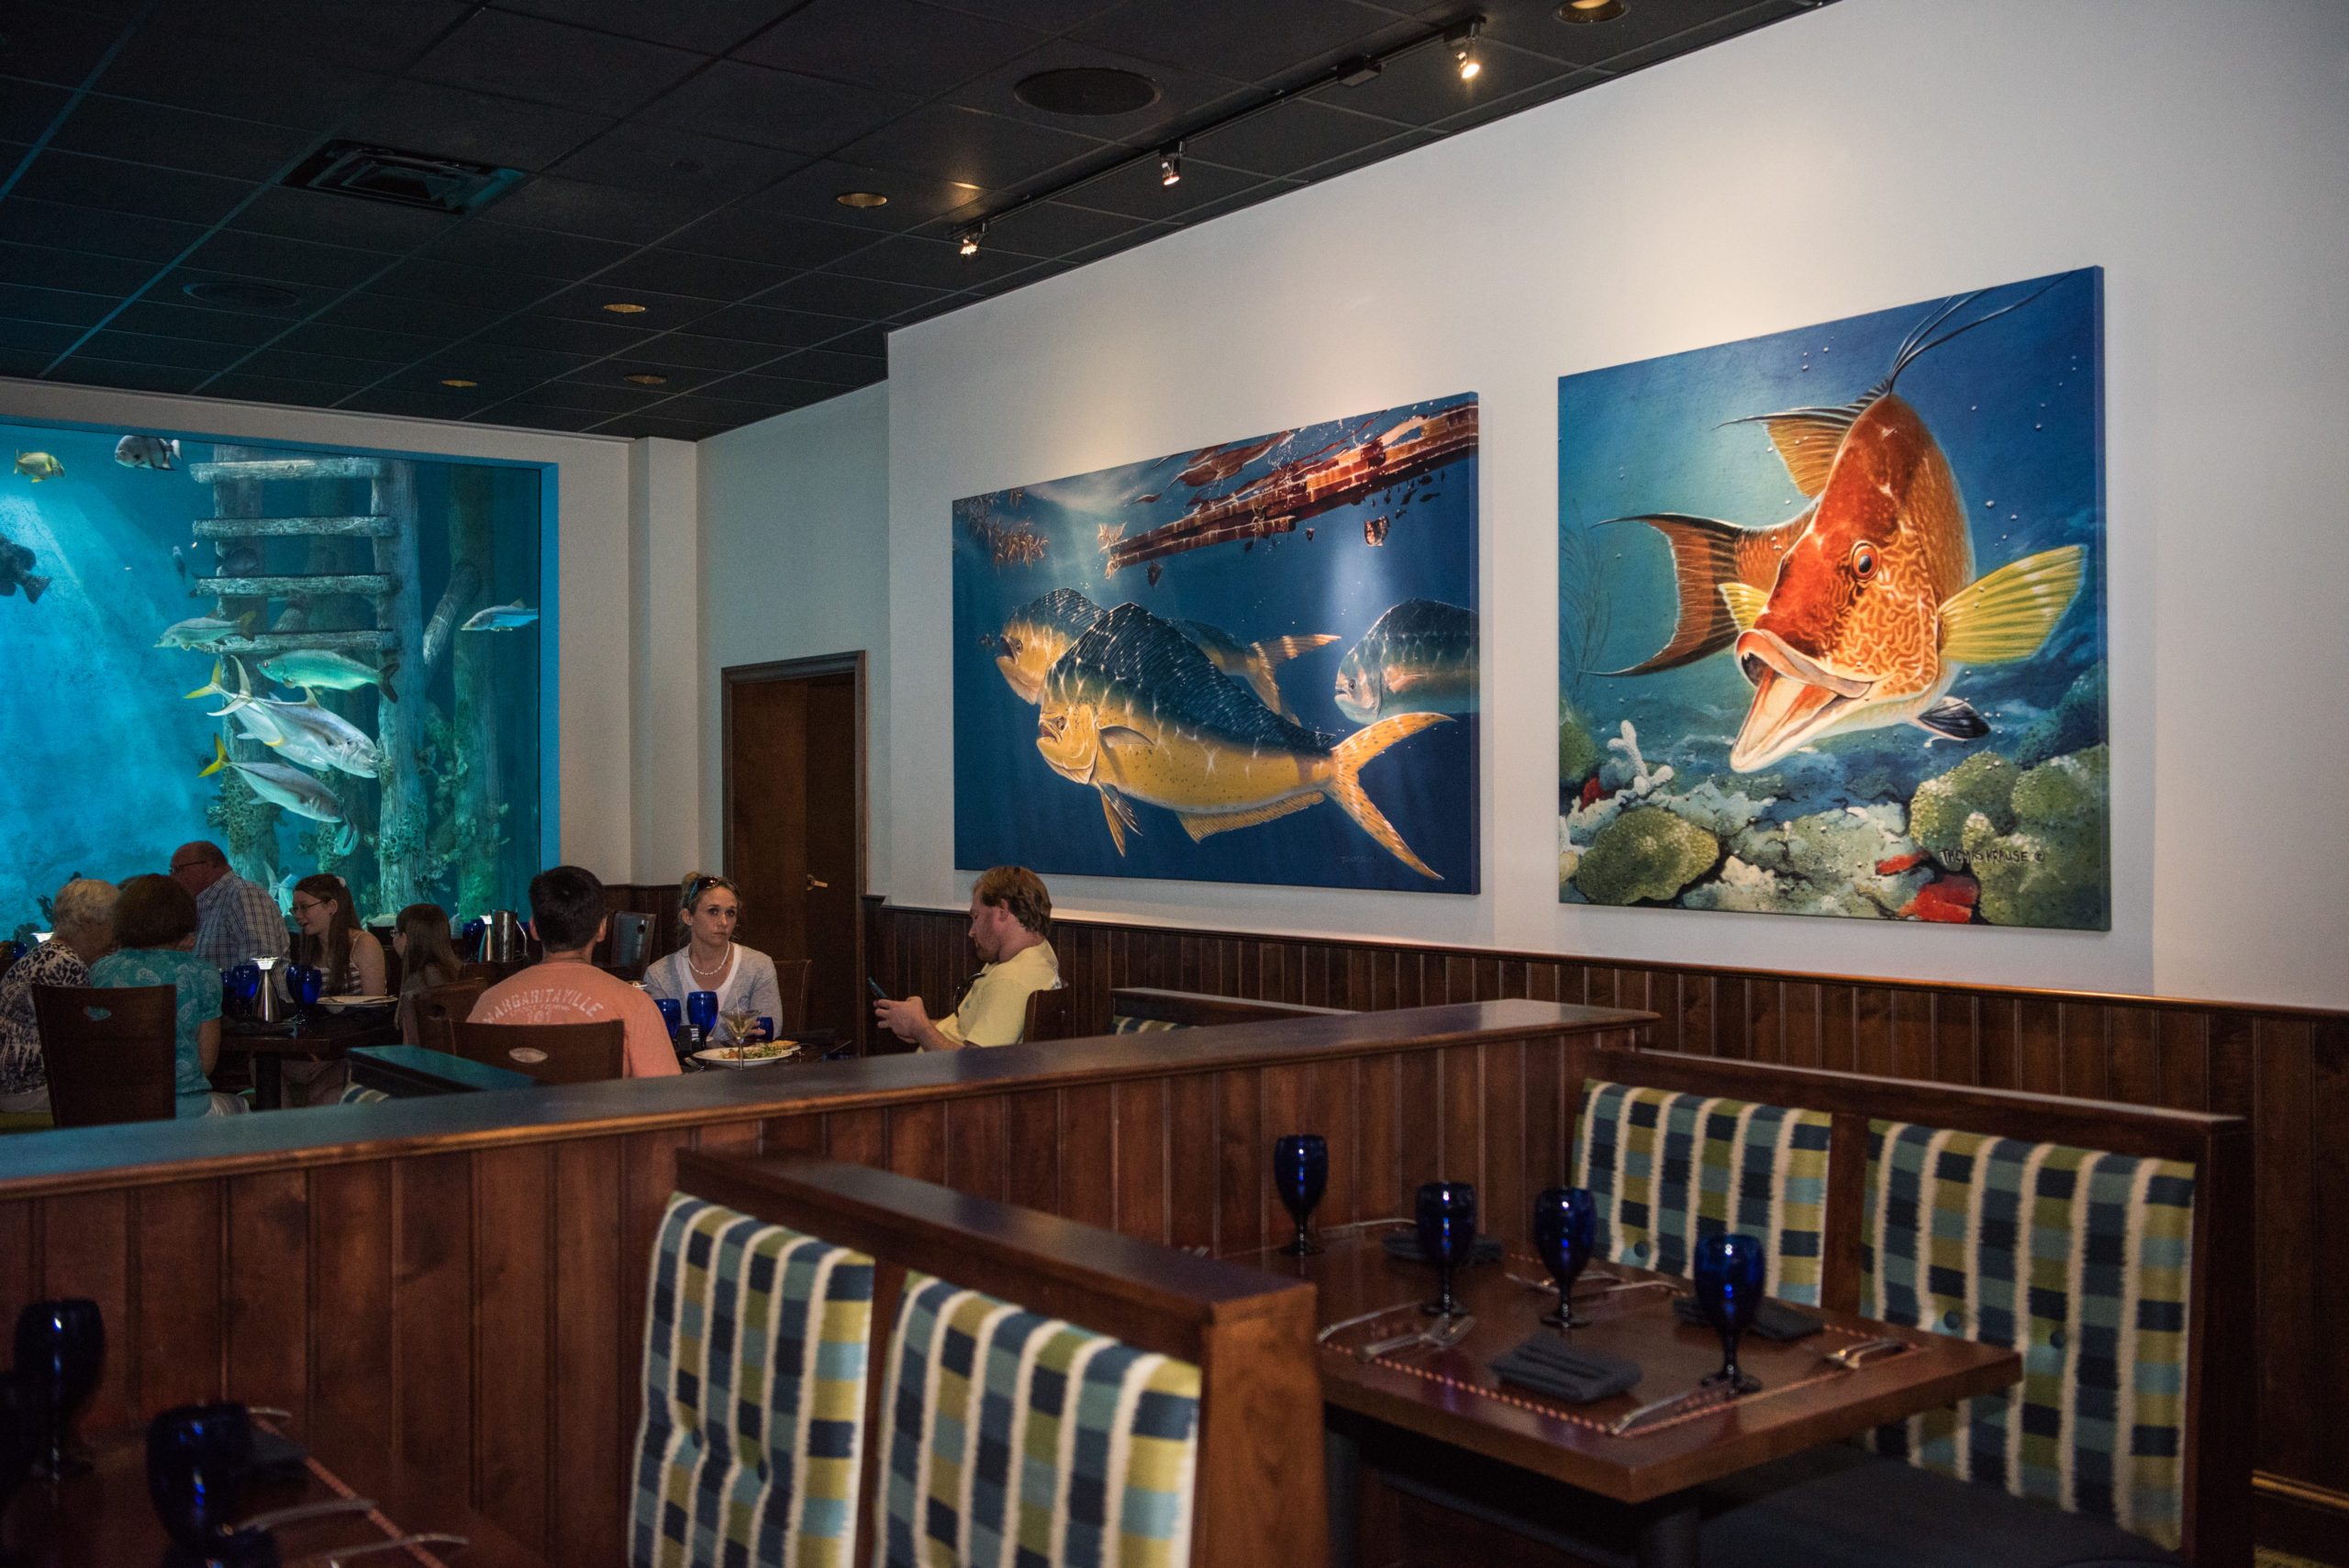 Inside of a sit-down restaurant is a poster display of large fishes swimming in the ocean